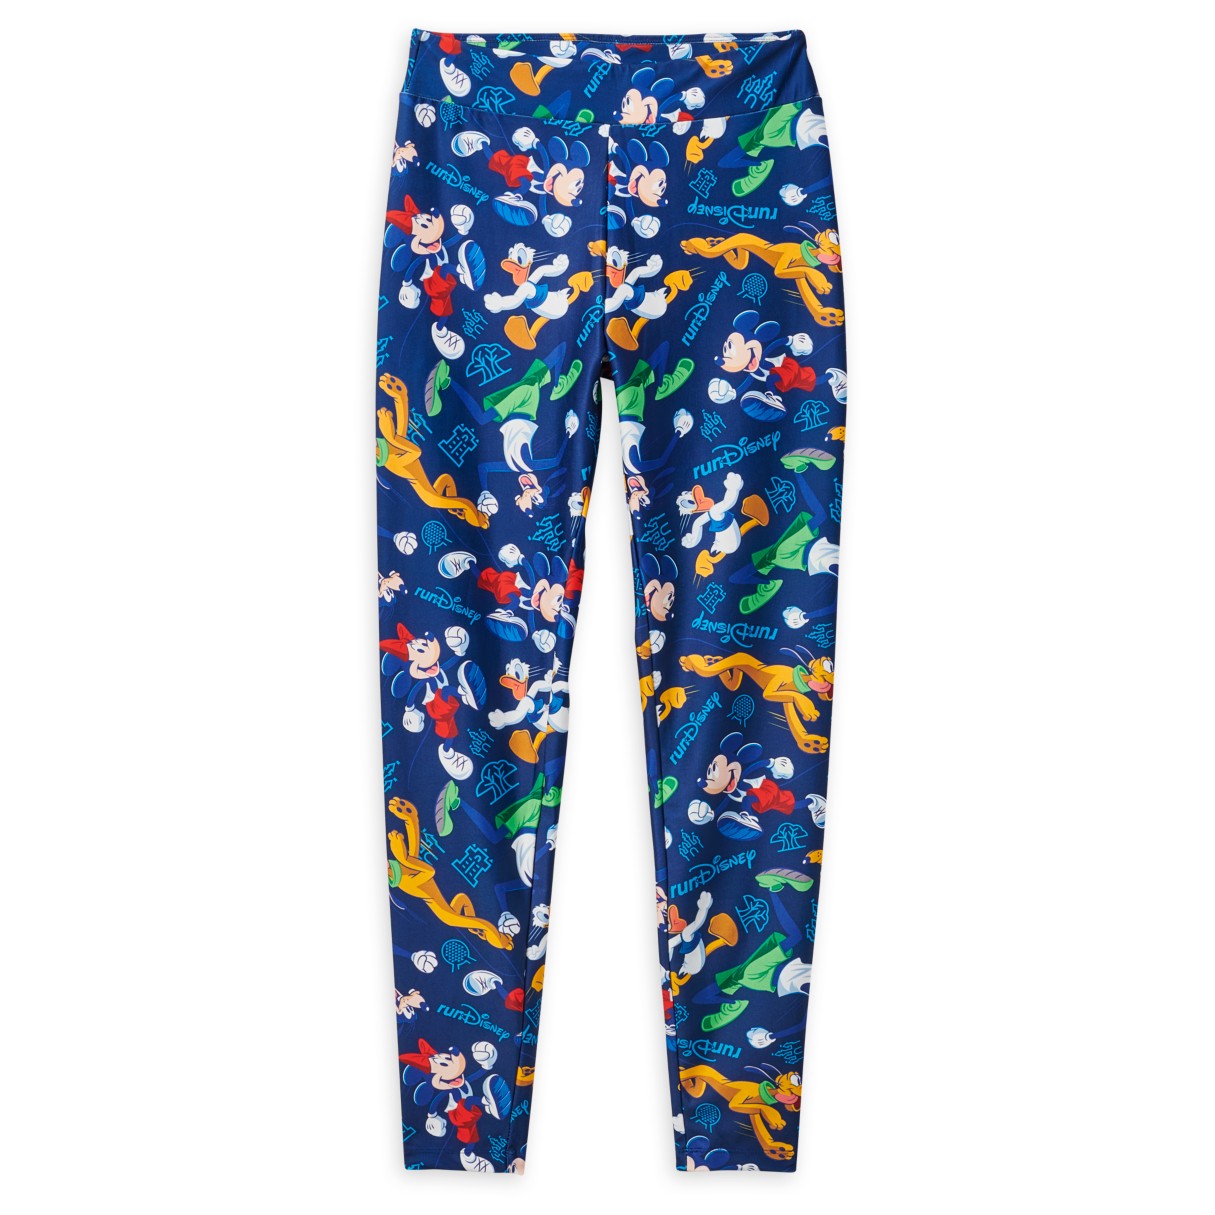 Mickey Mouse and Friends runDisney Leggings for Women